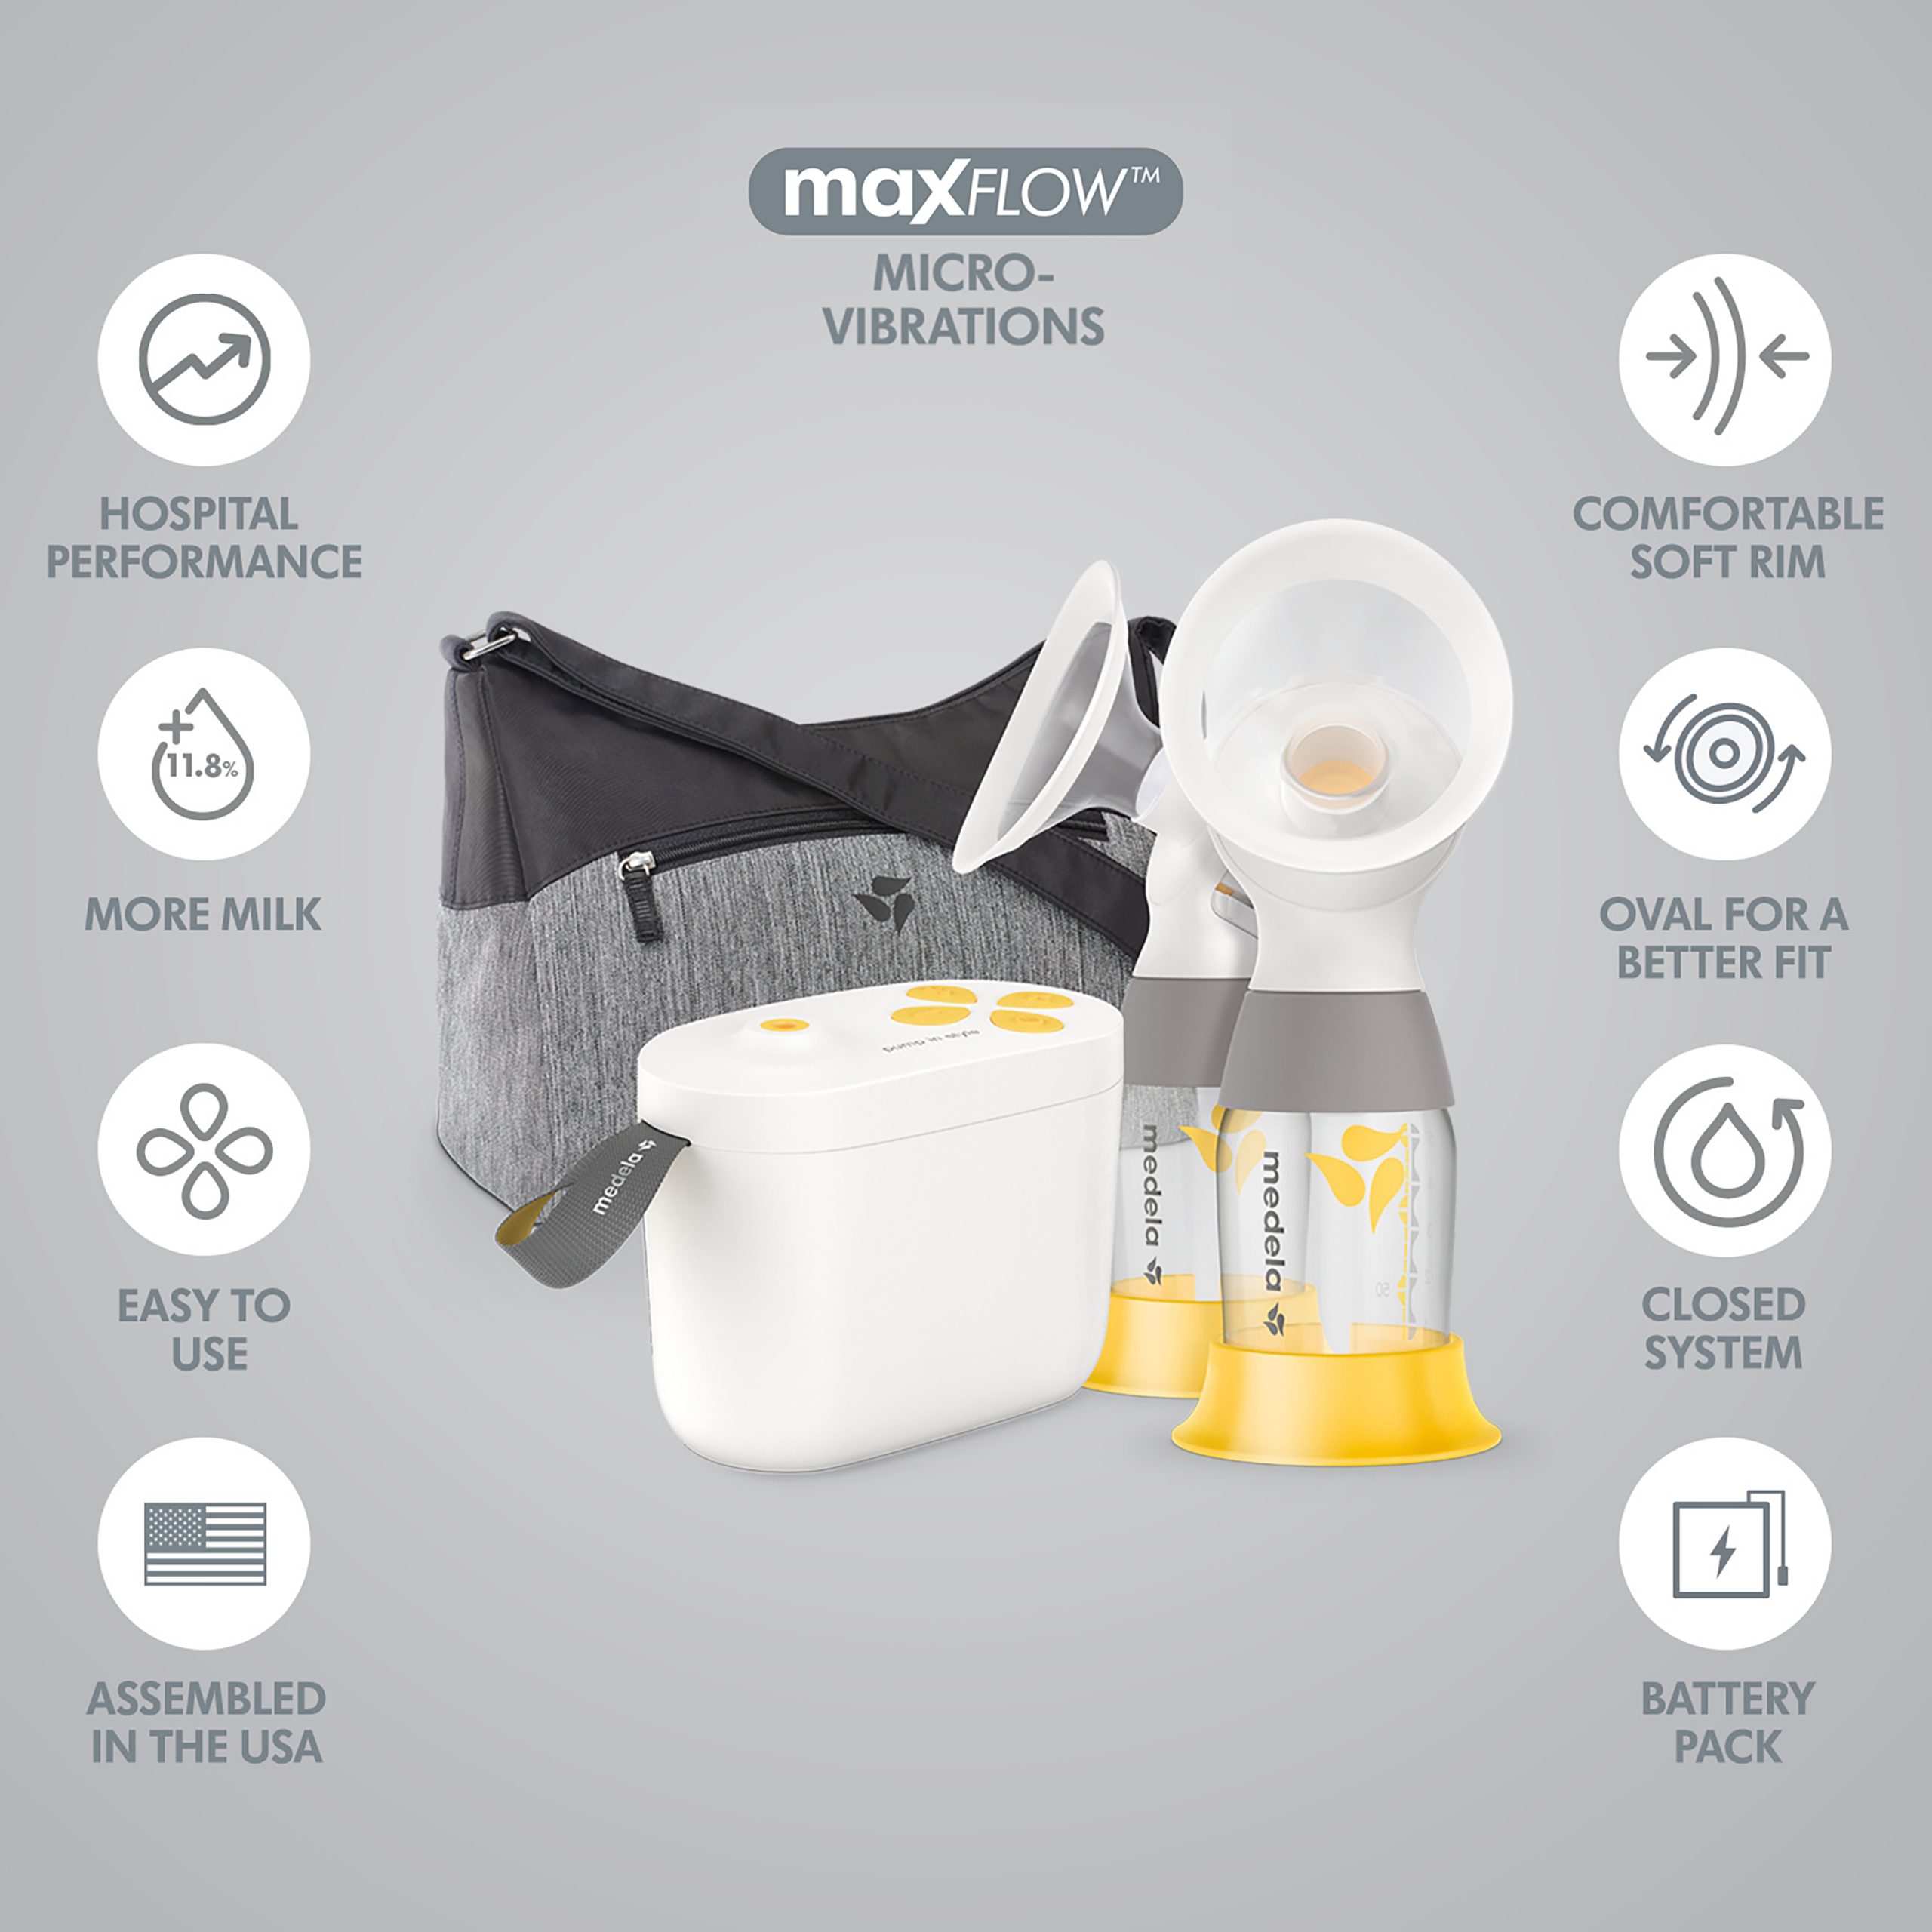 Medela Pump In Style with MaxFlow™ (Retail Set) - Breast Pumps Through  Insurance